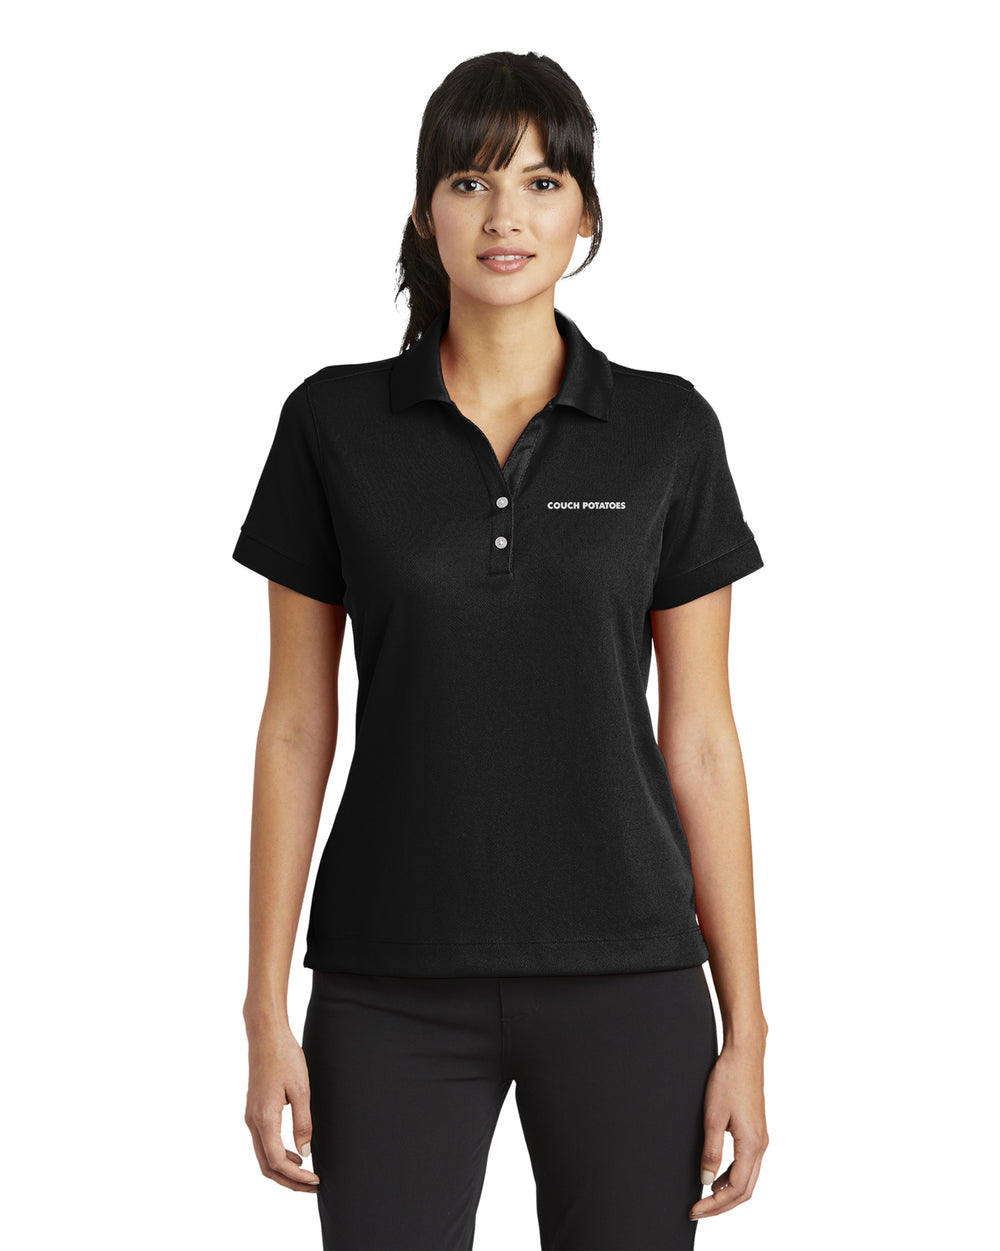 Couch Potatoes - Nike Ladies Dri-FIT Classic Polo - 286772